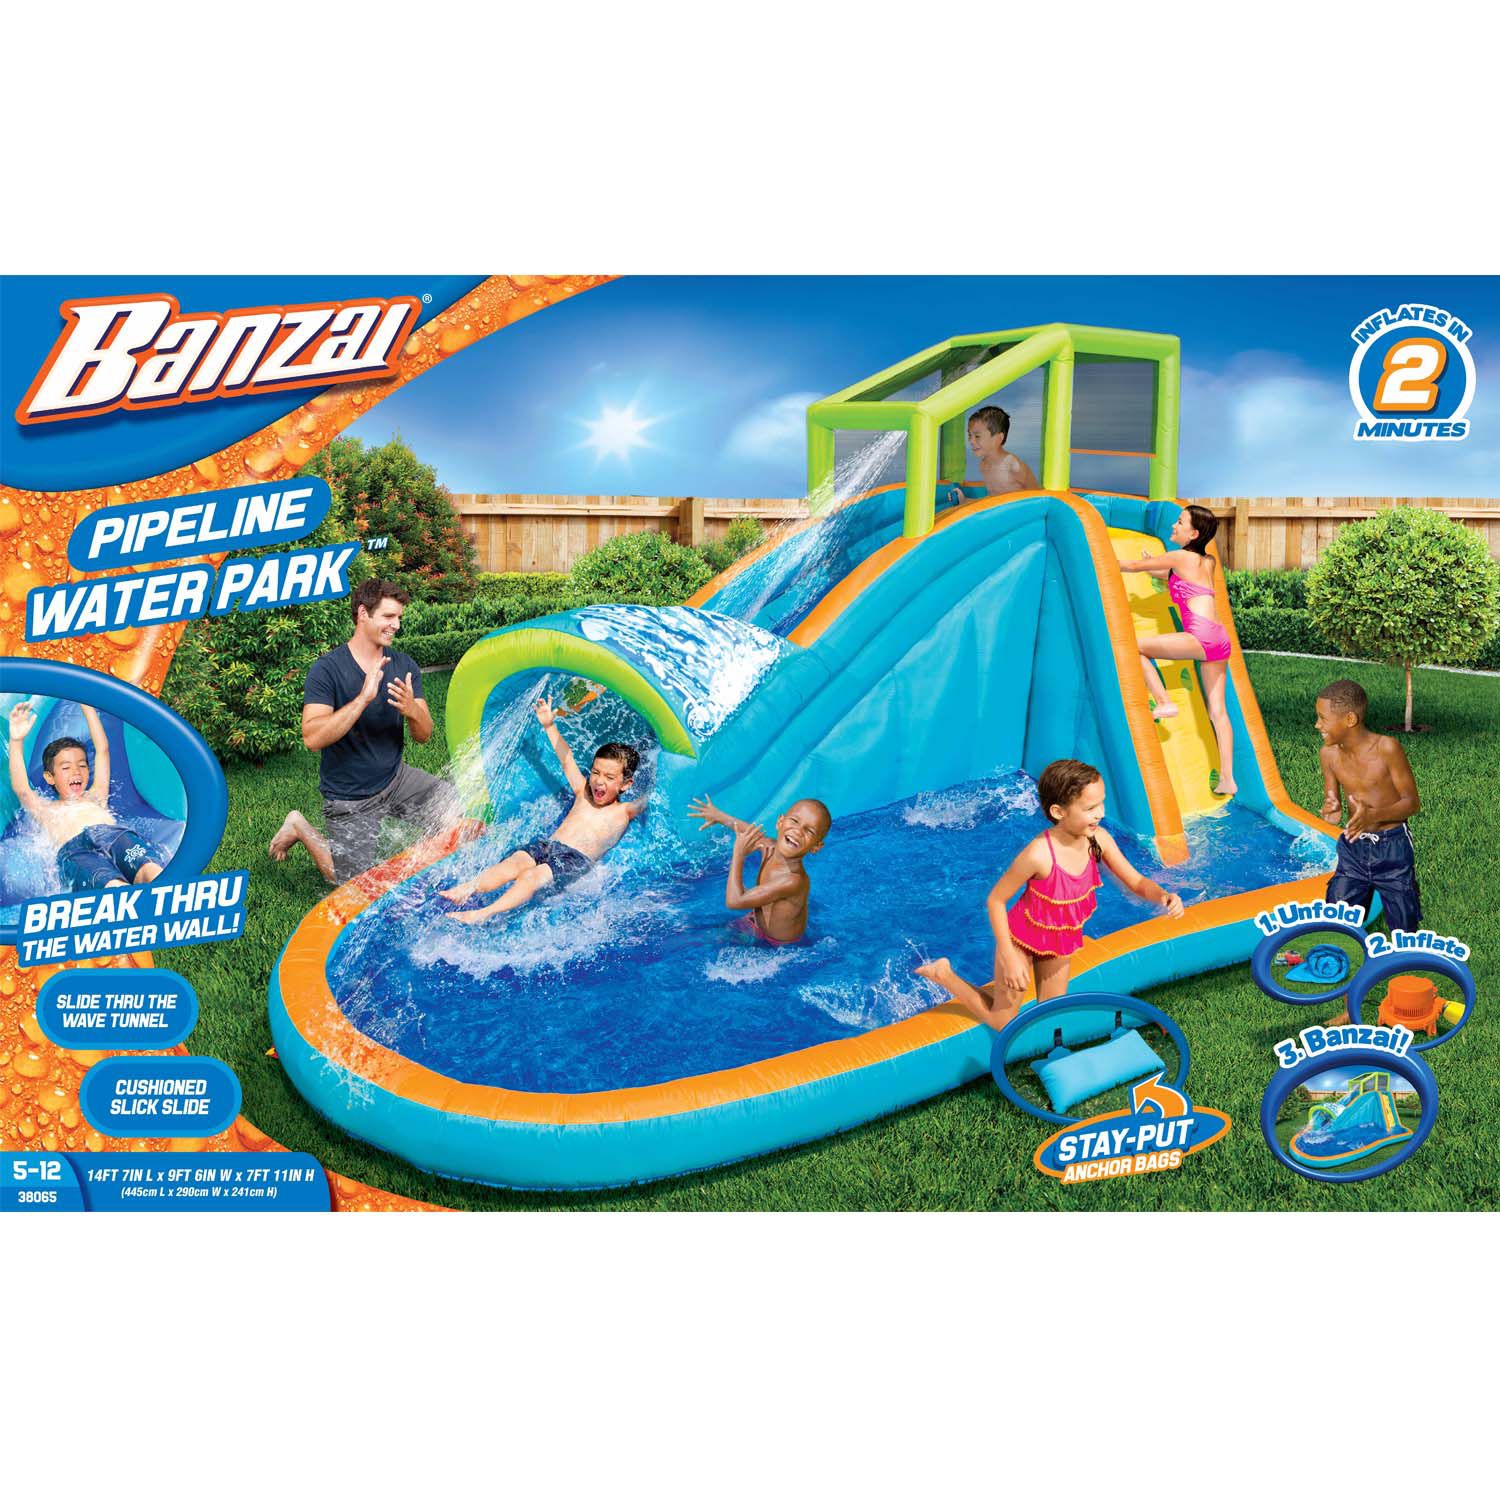 Banzai Pipeline Water Park Toy Top Sellers, 54% OFF | www 